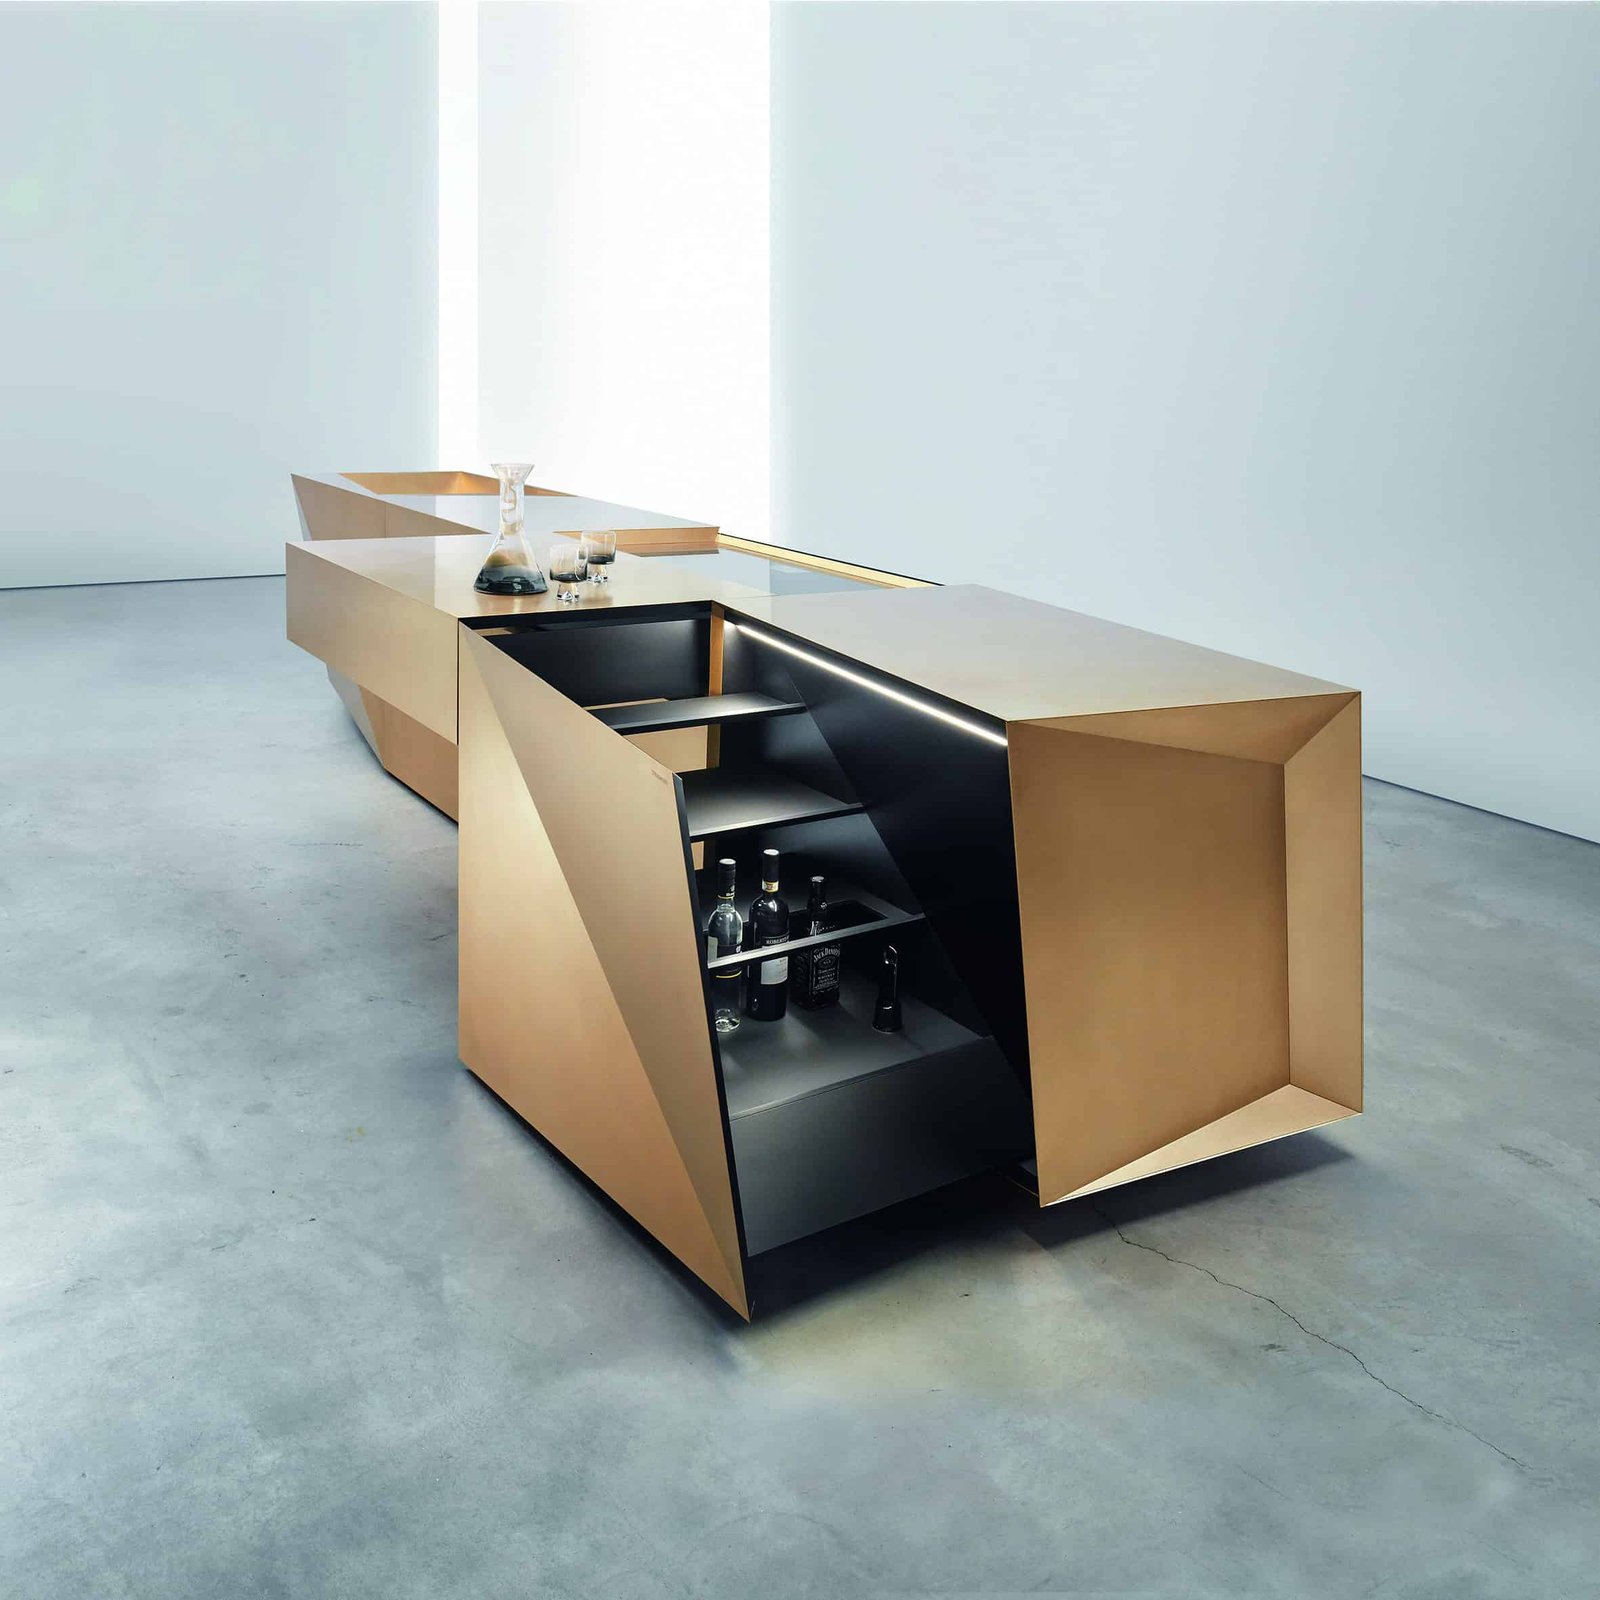 A modern kitchen with a wooden counter top that combines form and function.